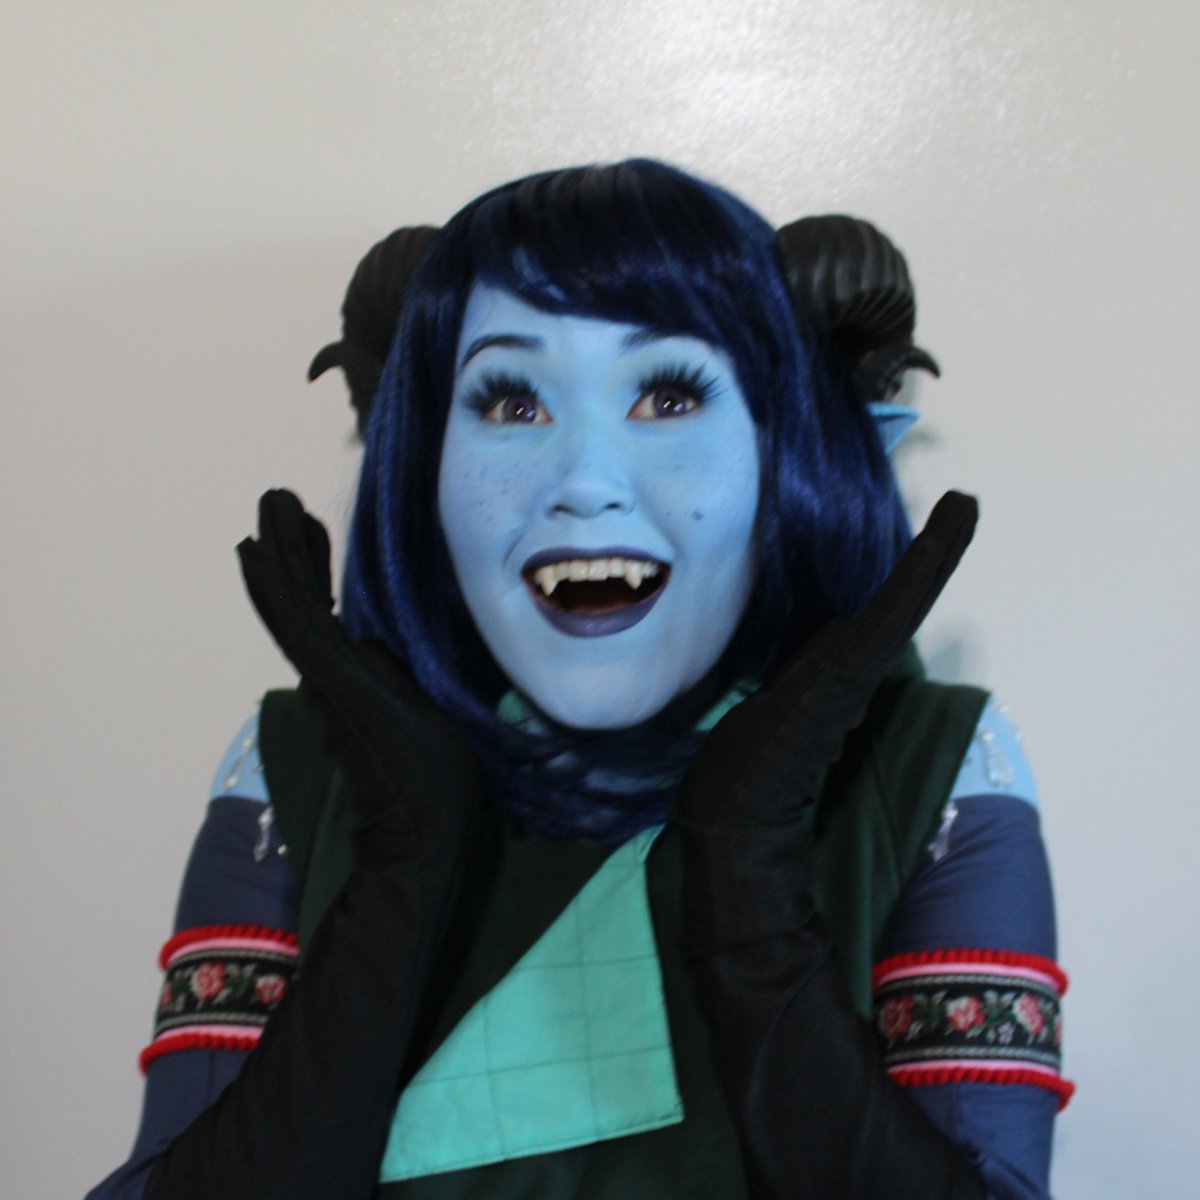 Cosplay of Jester Lavorre from Critical Role. 